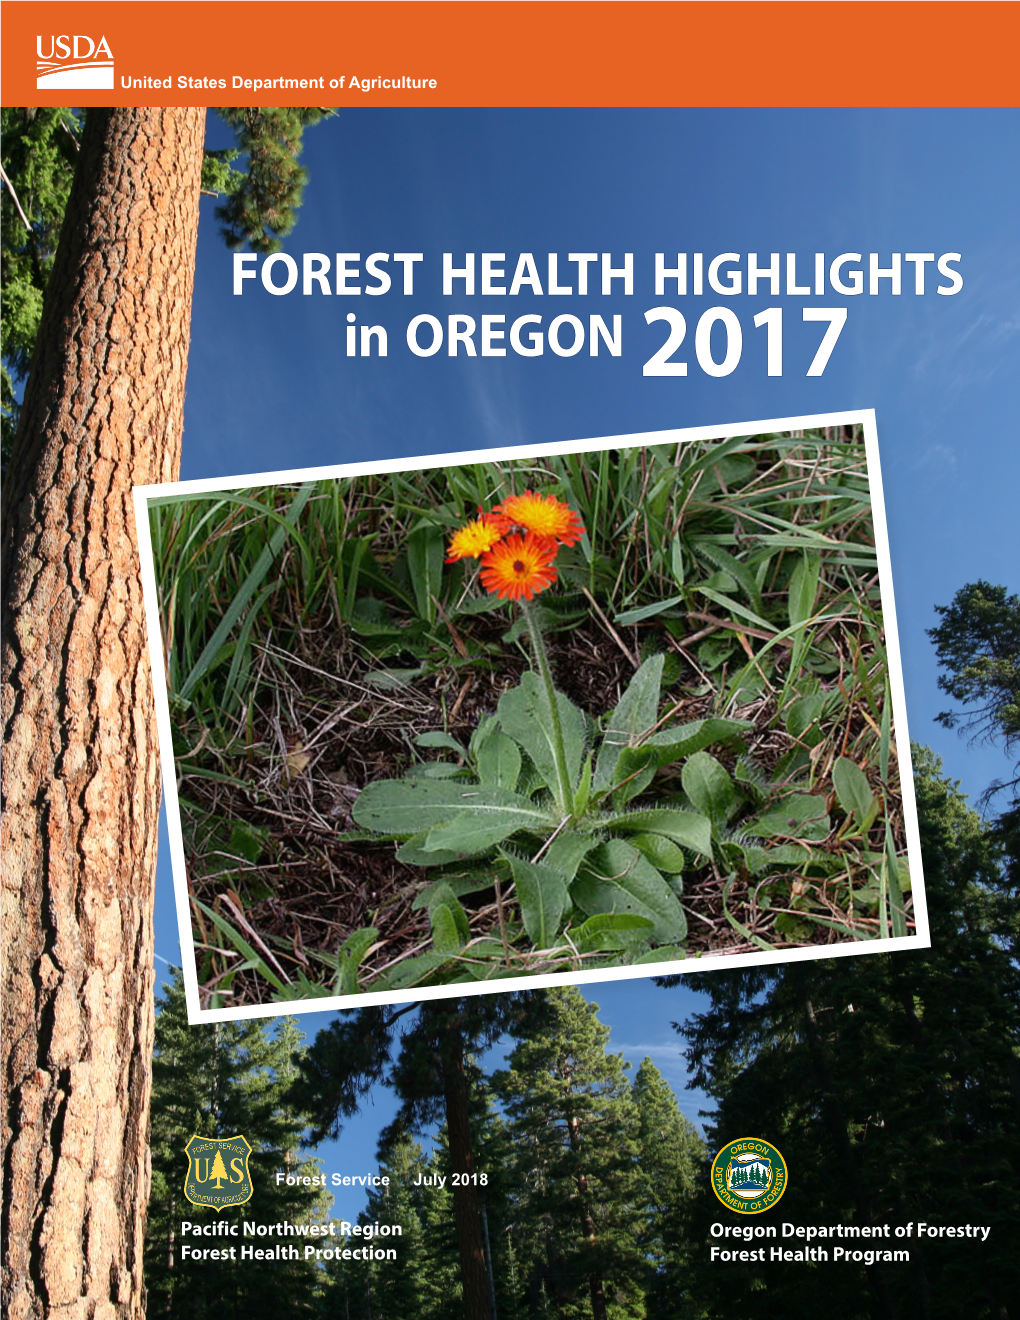 FOREST HEALTH HIGHLIGHTS in OREGON 2017